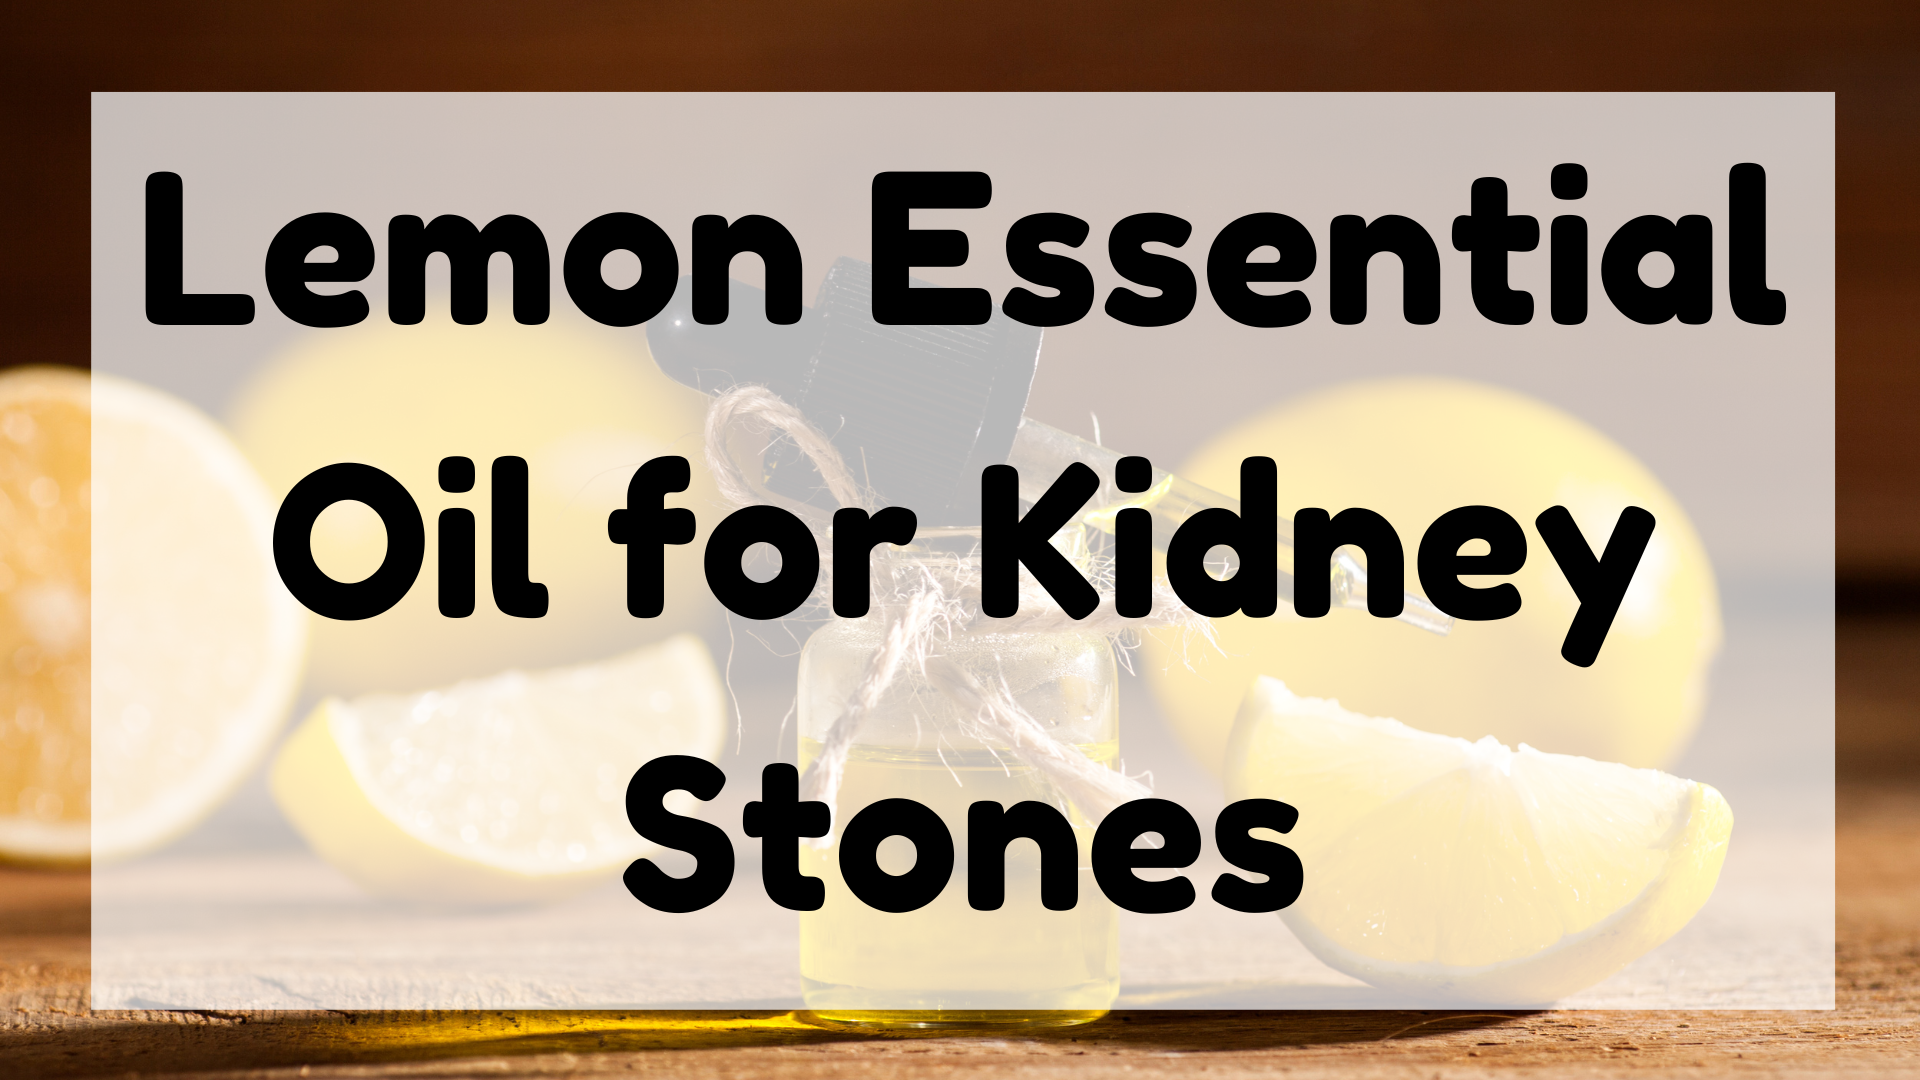 Lemon Essential Oil for Kidney Stones featured image